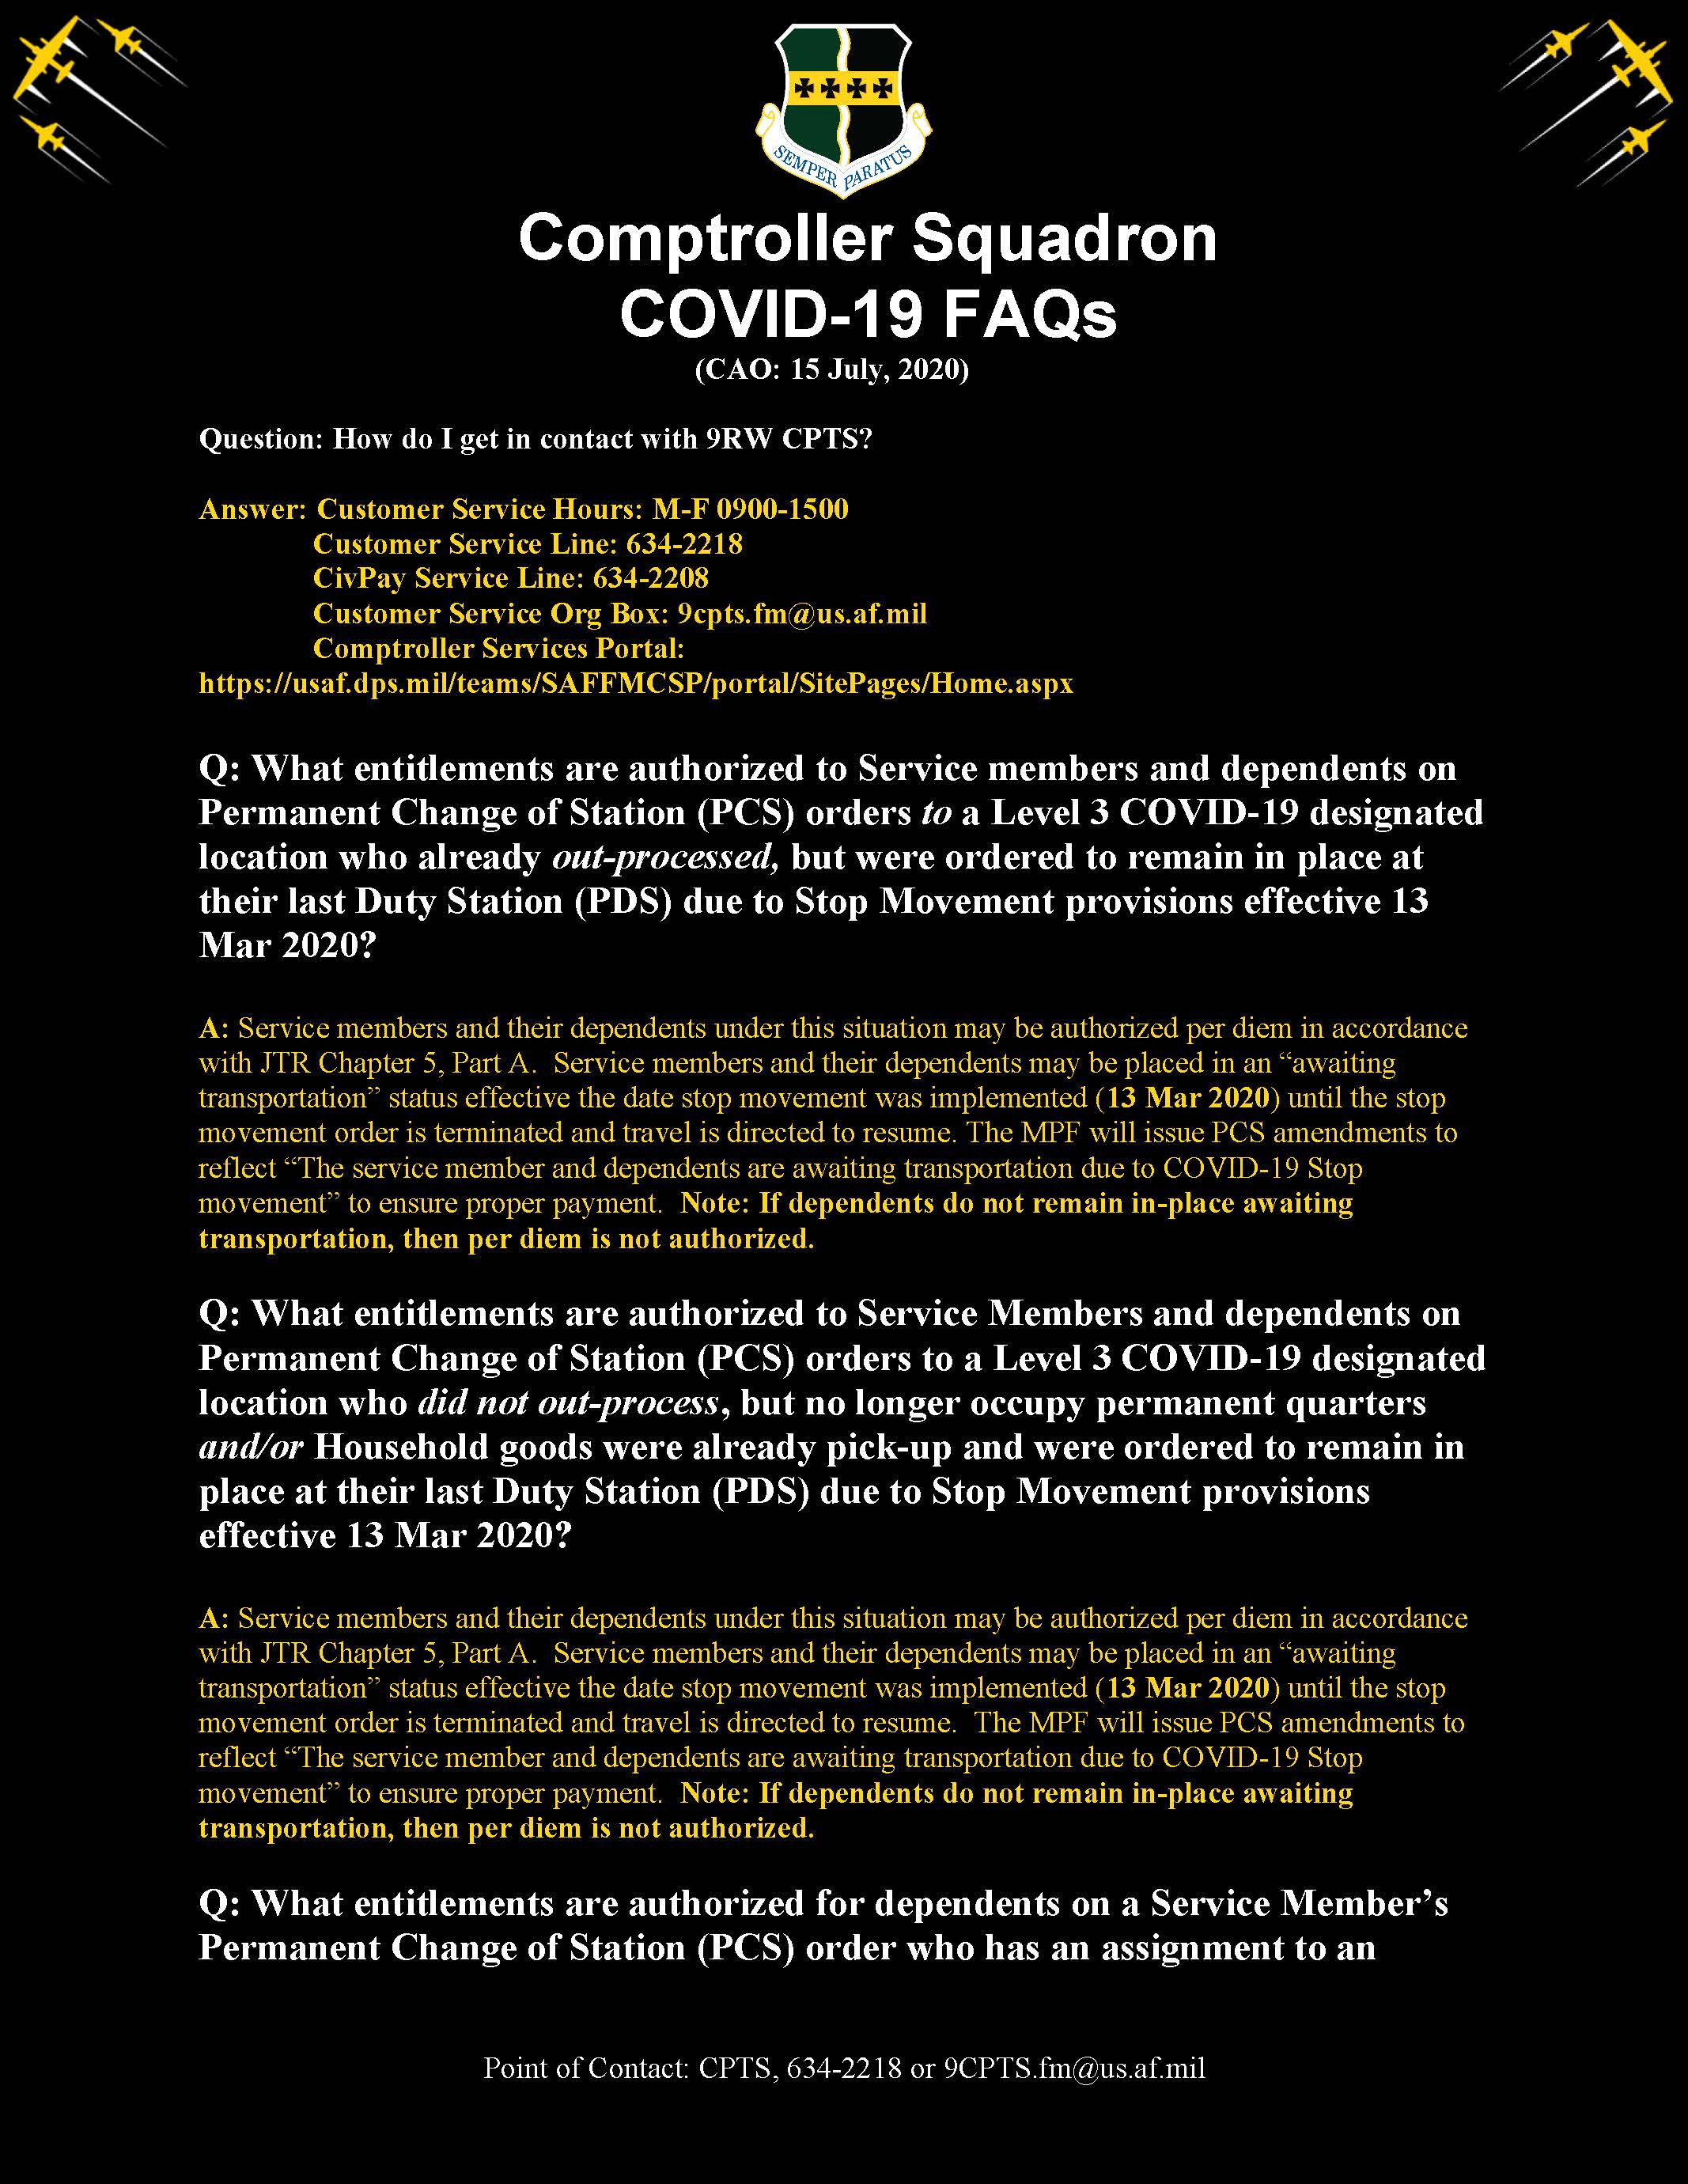 CPTS COVID-19 FAQs and Entitlements